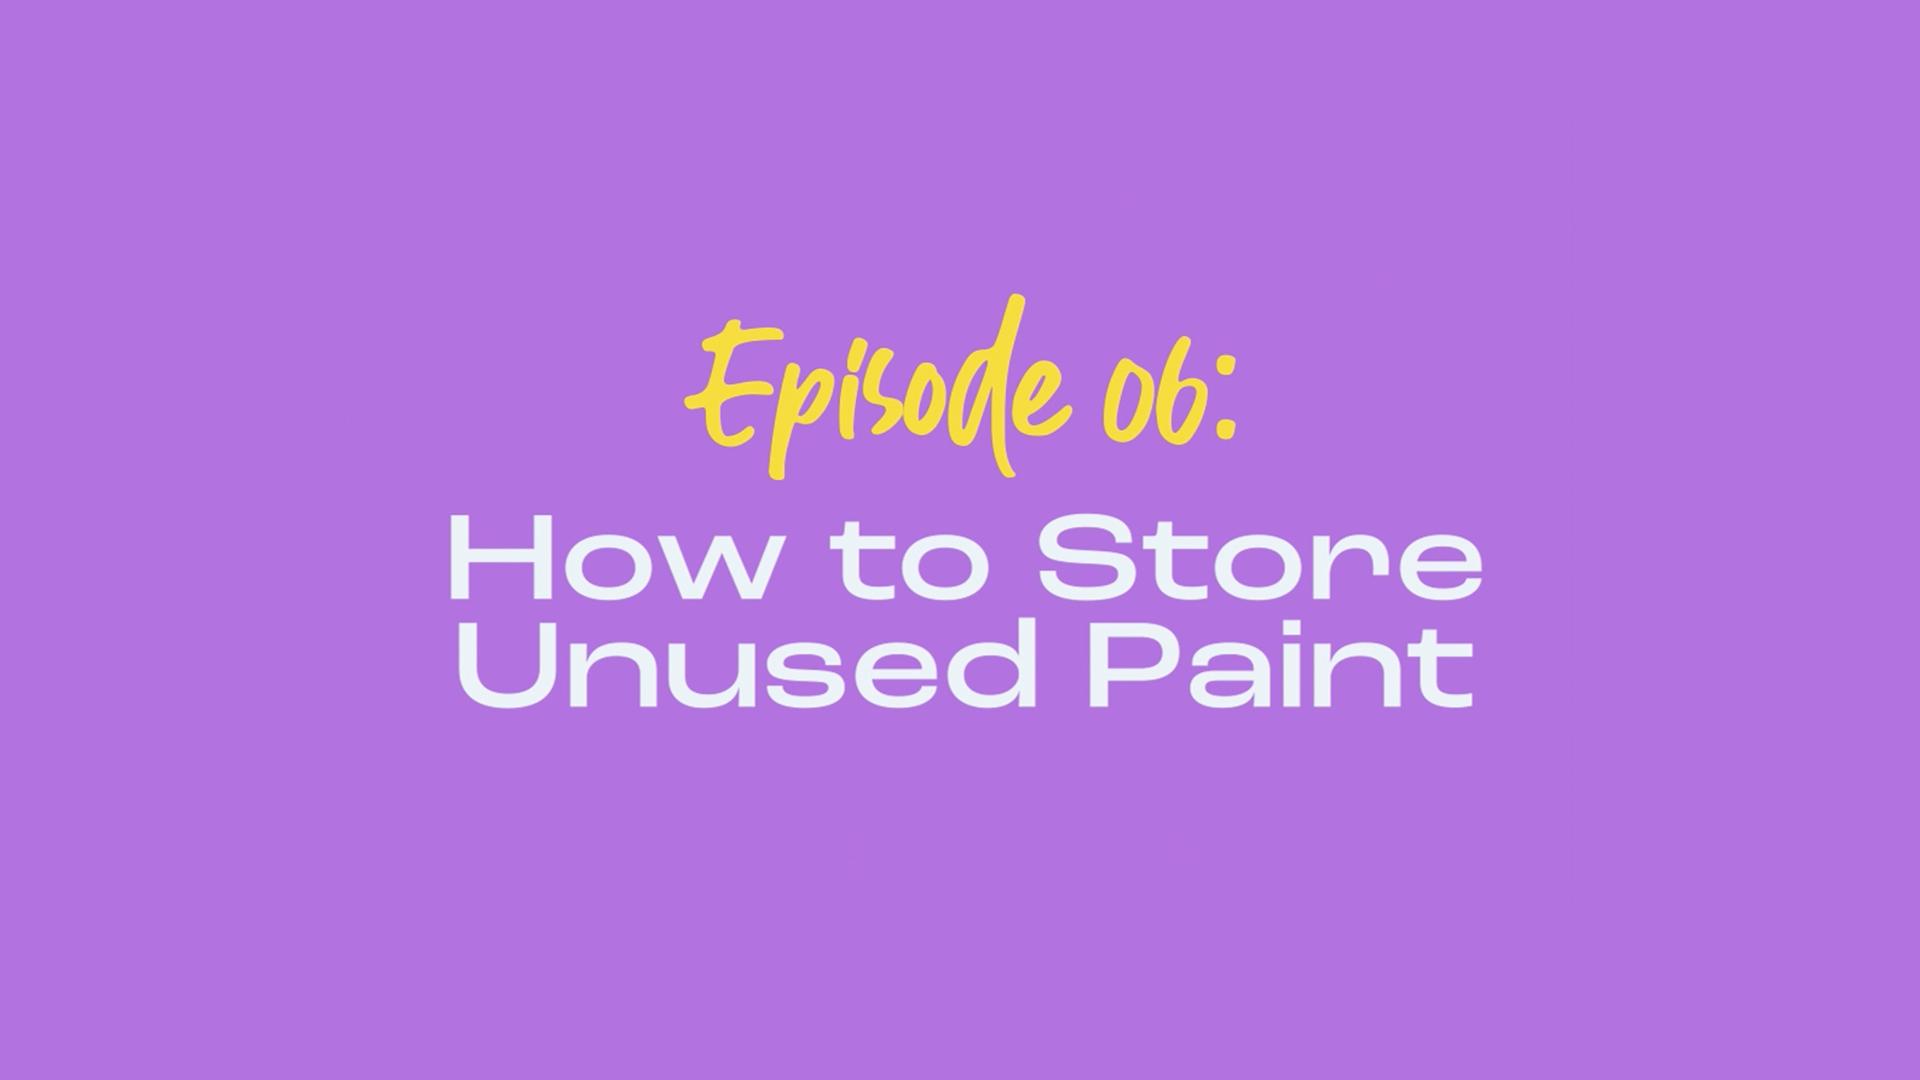 Painting It Easy
How to Store Unused Paint